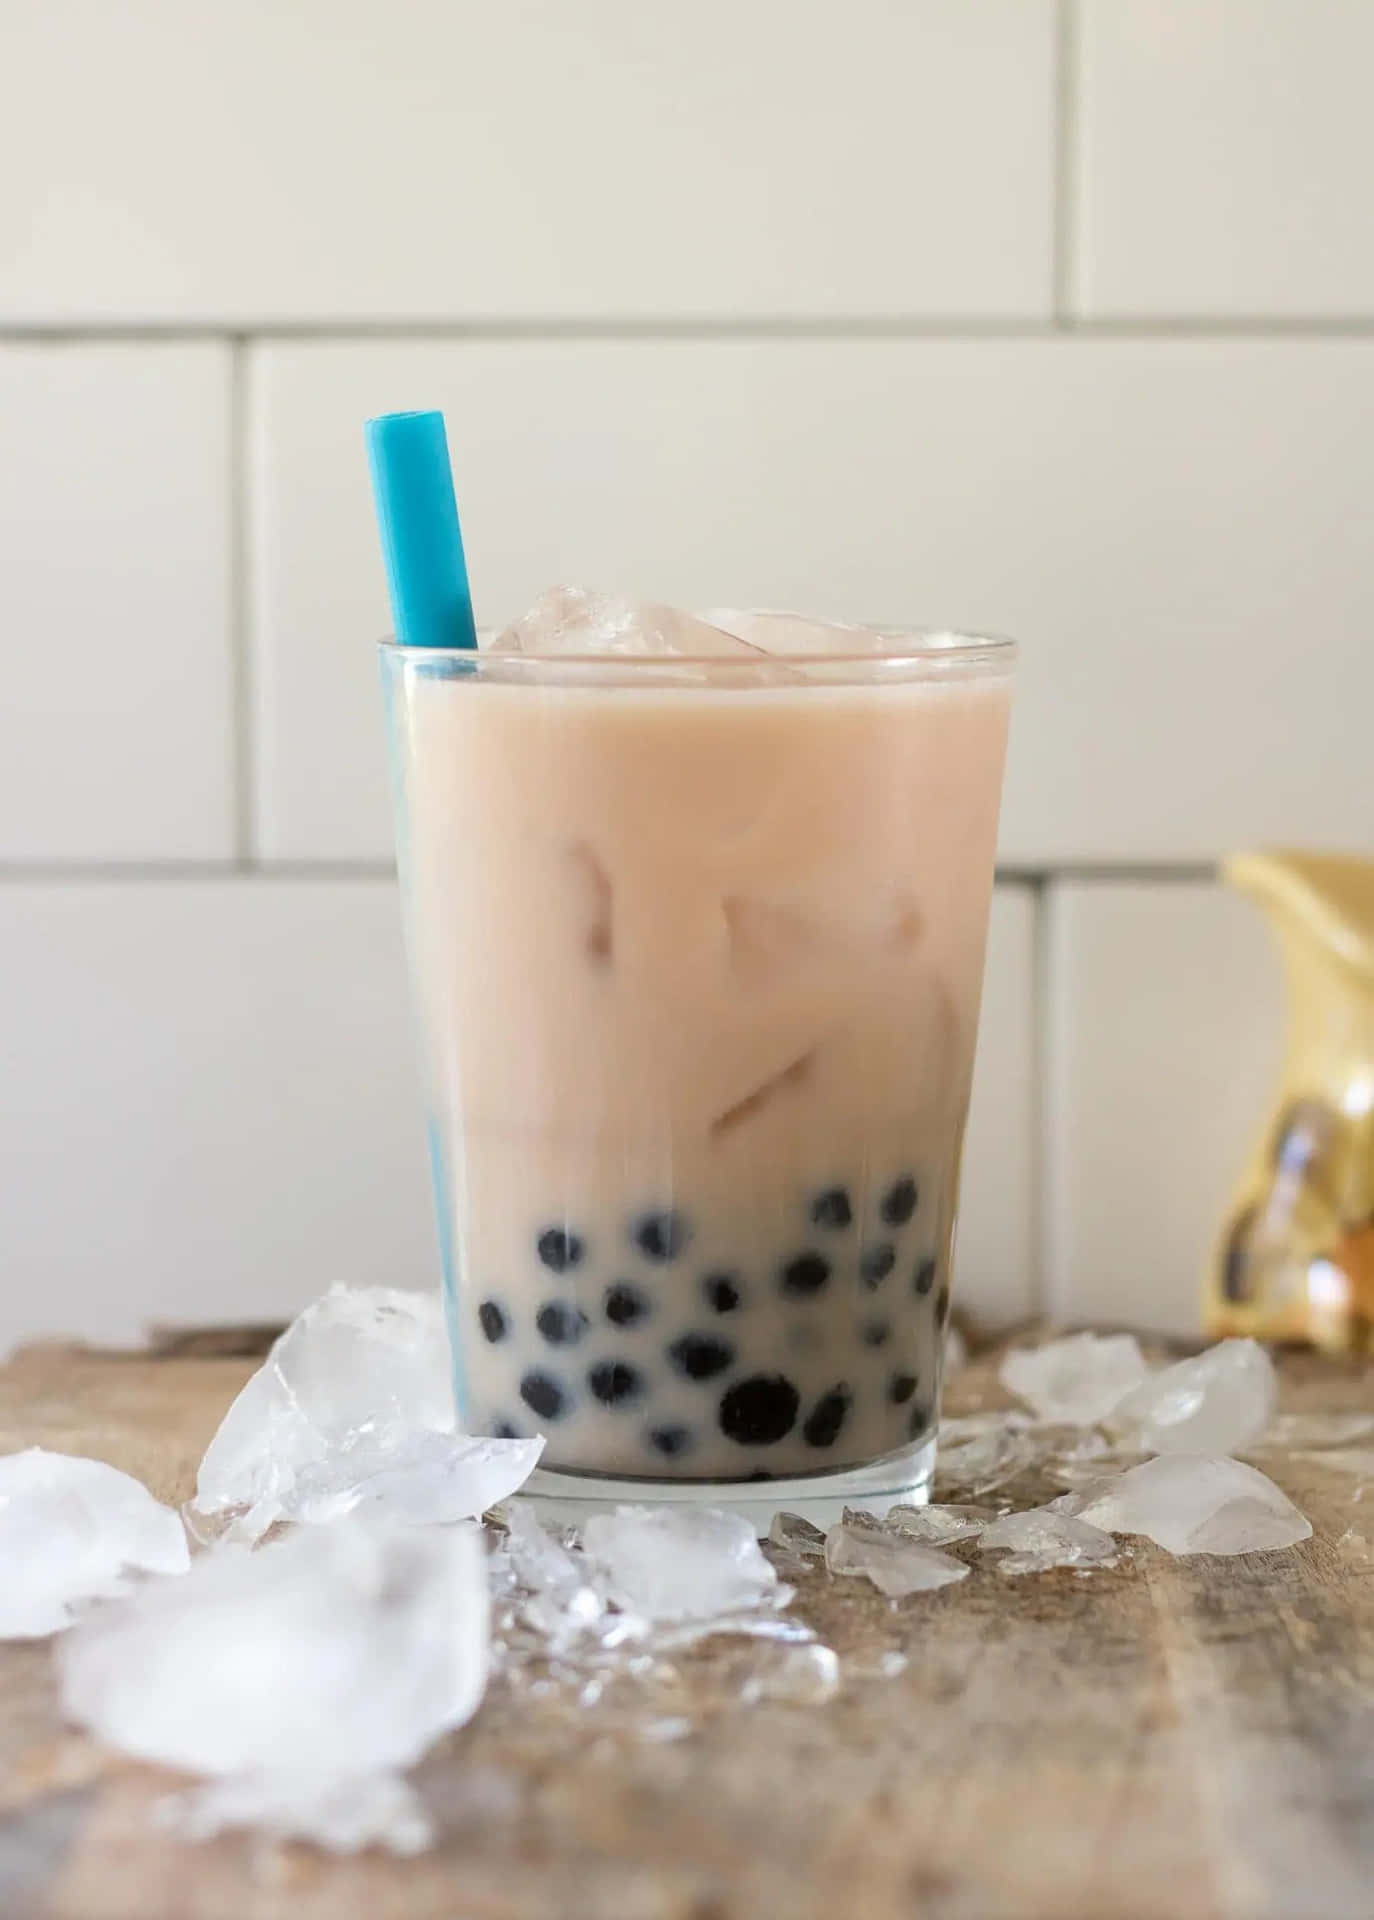 "Indulge in the Most Delicious Bubble Tea!"